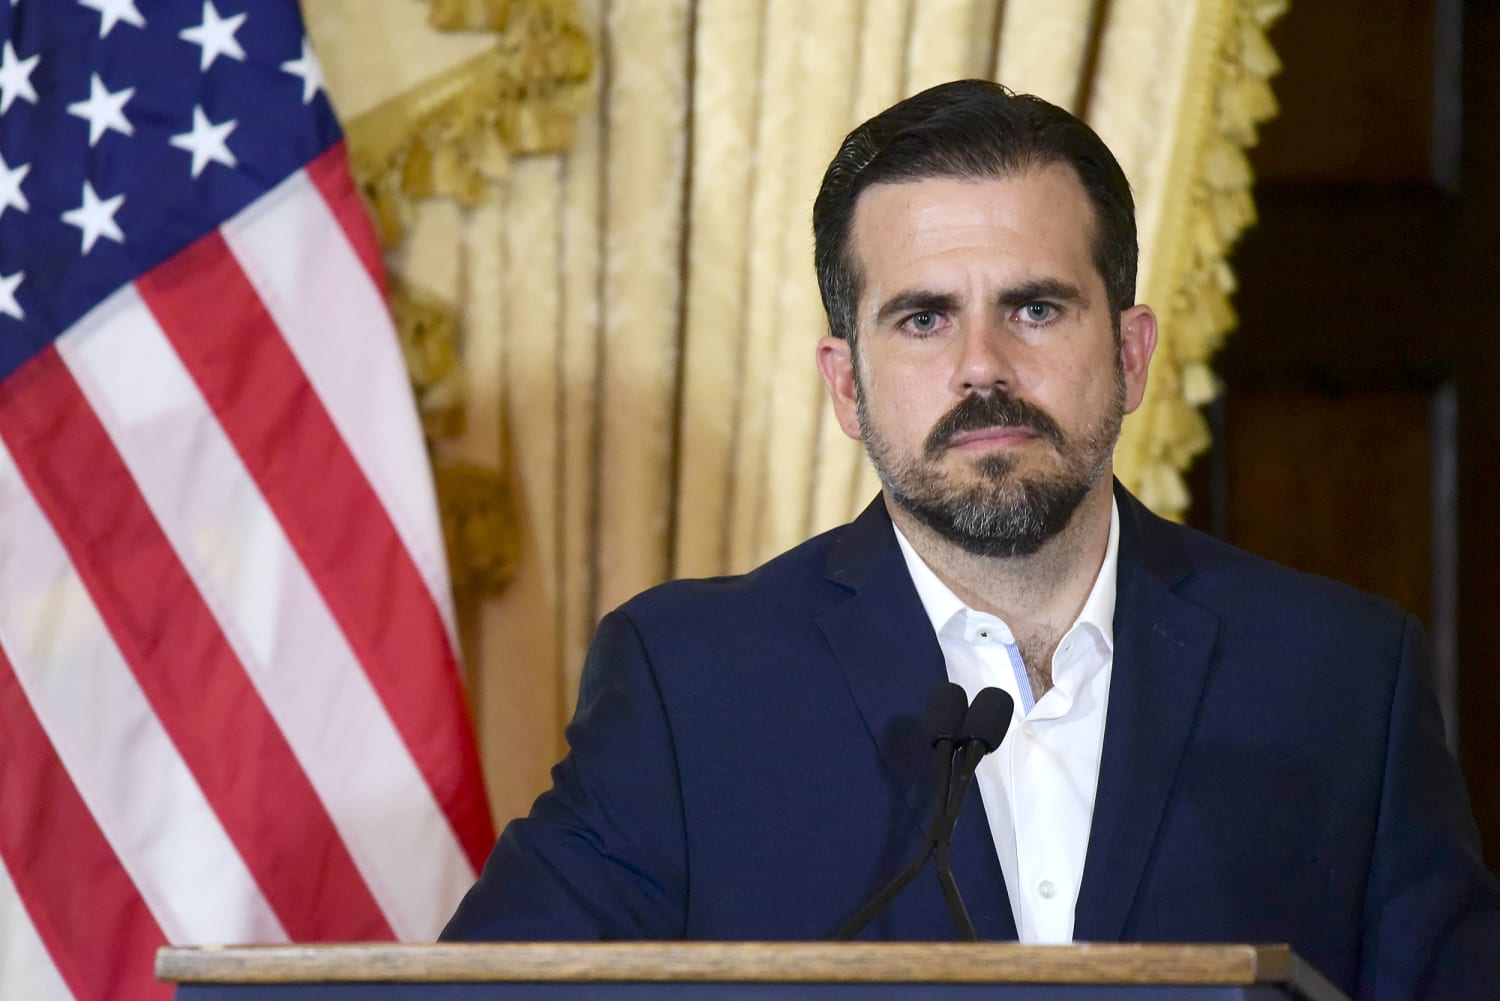 Múltiple Comparable Turbina Rosselló will stay as Puerto Rico governor but won't seek re-election